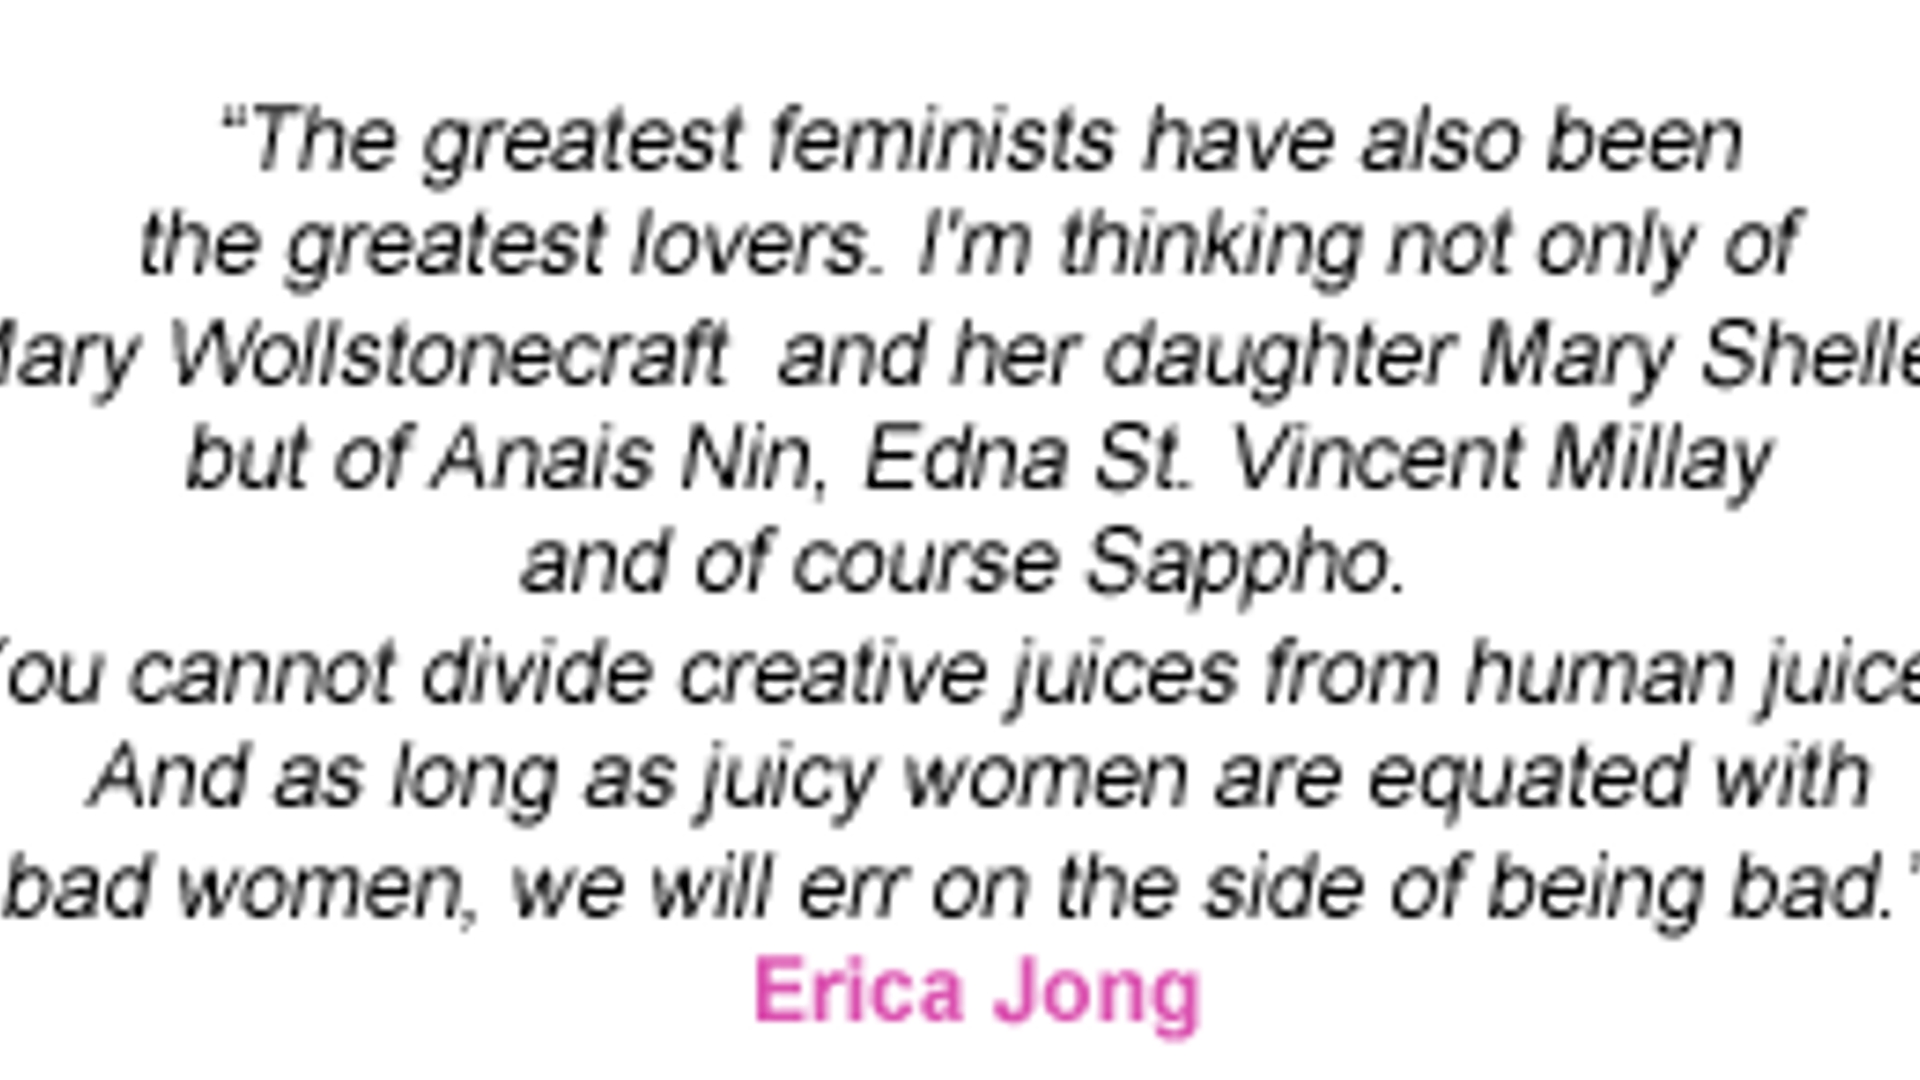 RTEmagicC_erica.png